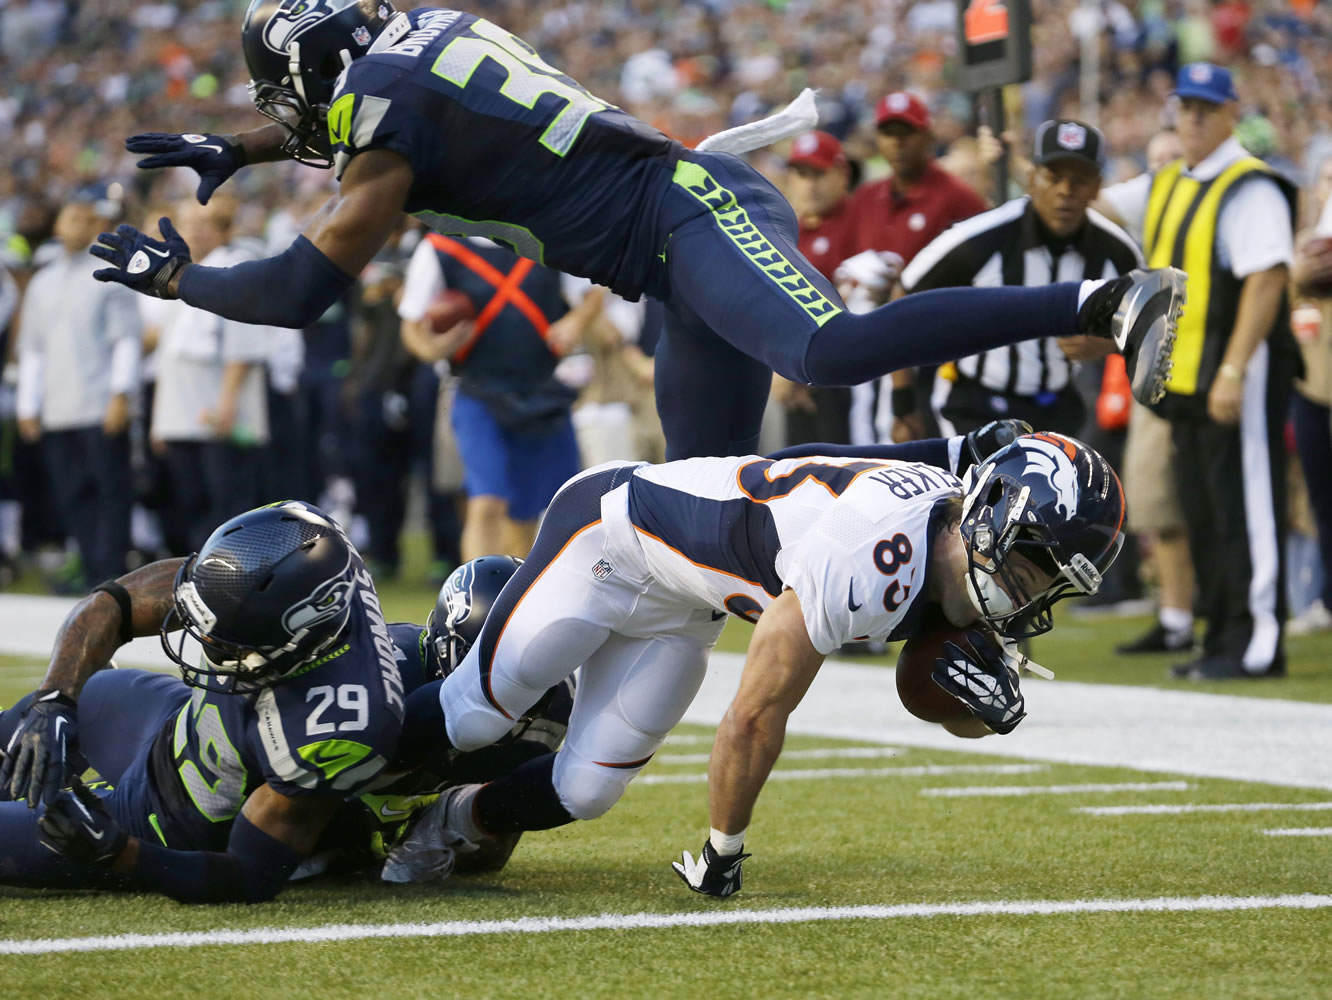 Denver Broncos wide receiver Wes Welker scores a touchdown under the defense of a leaping Seattle Seahawks cornerback Brandon Browner (39) and tackles by Seahawks' Earl Thomas (29) and Antoine Winfield (obscured) in the first half of a preseason NFL football game, Saturday, Aug. 17, 2013, in Seattle.